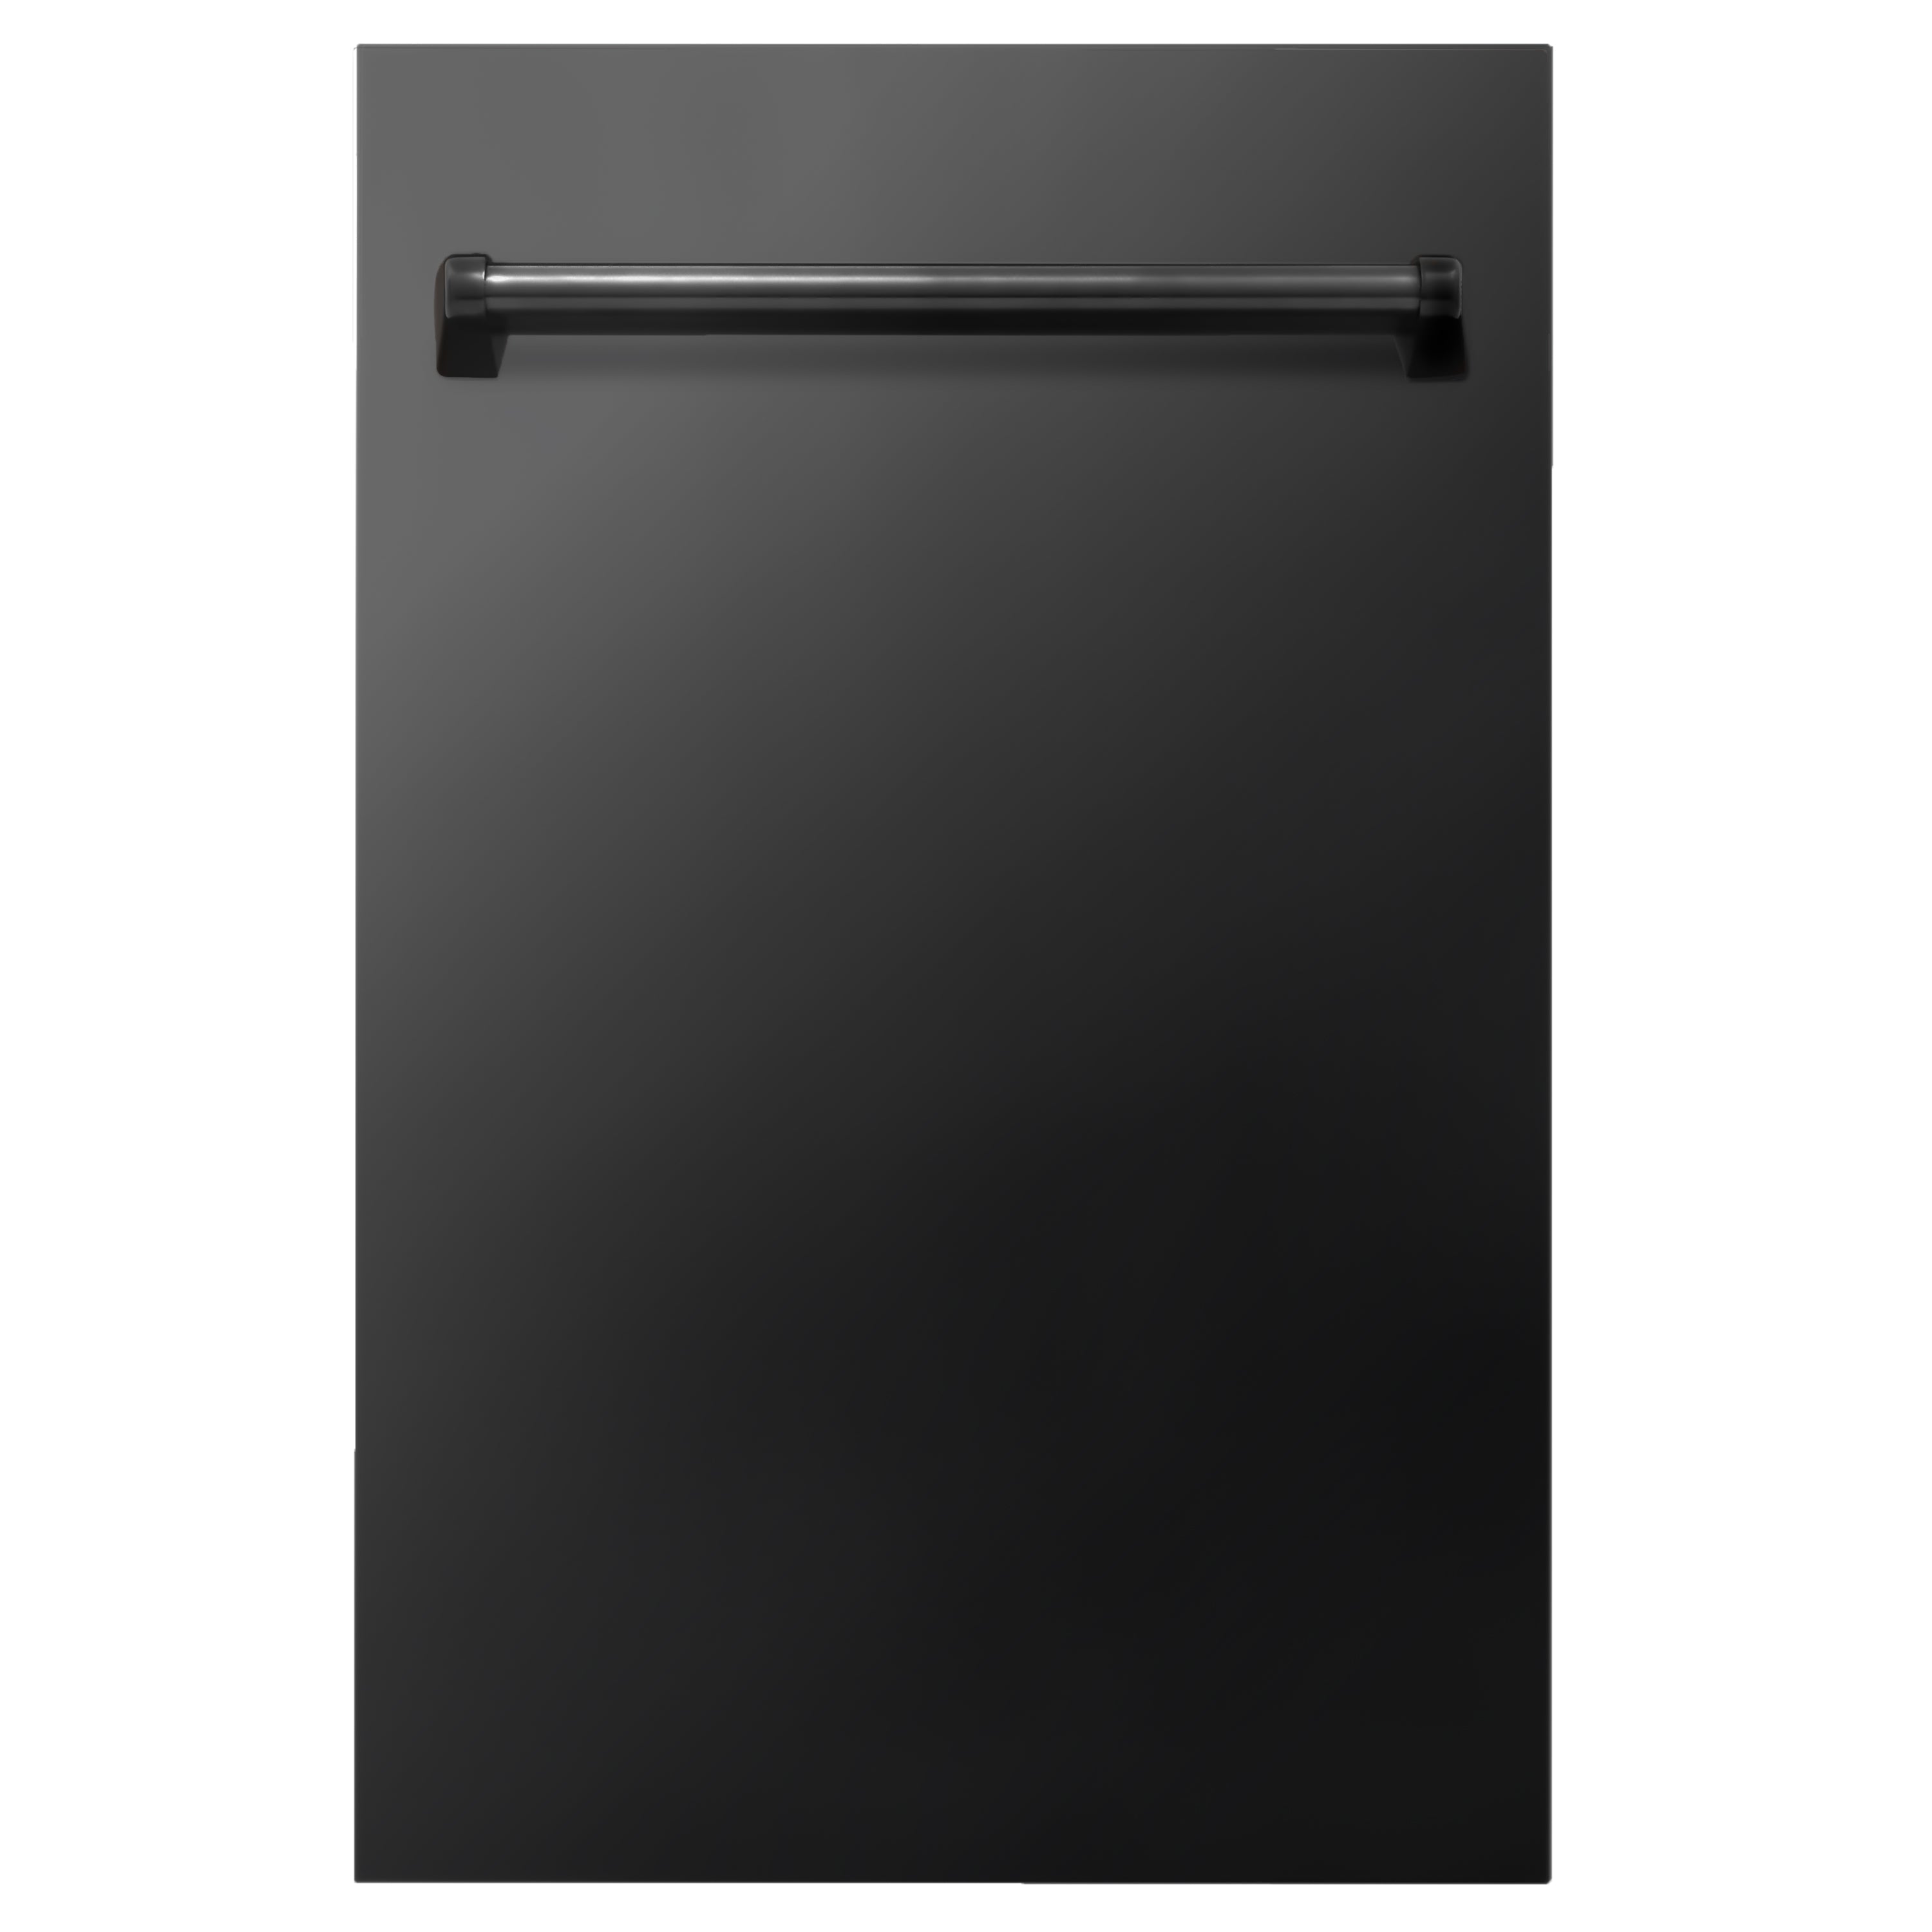 ZLINE 18" Dishwasher Panel in Black Stainless Steel with Traditional Handle (DP-BS-18)